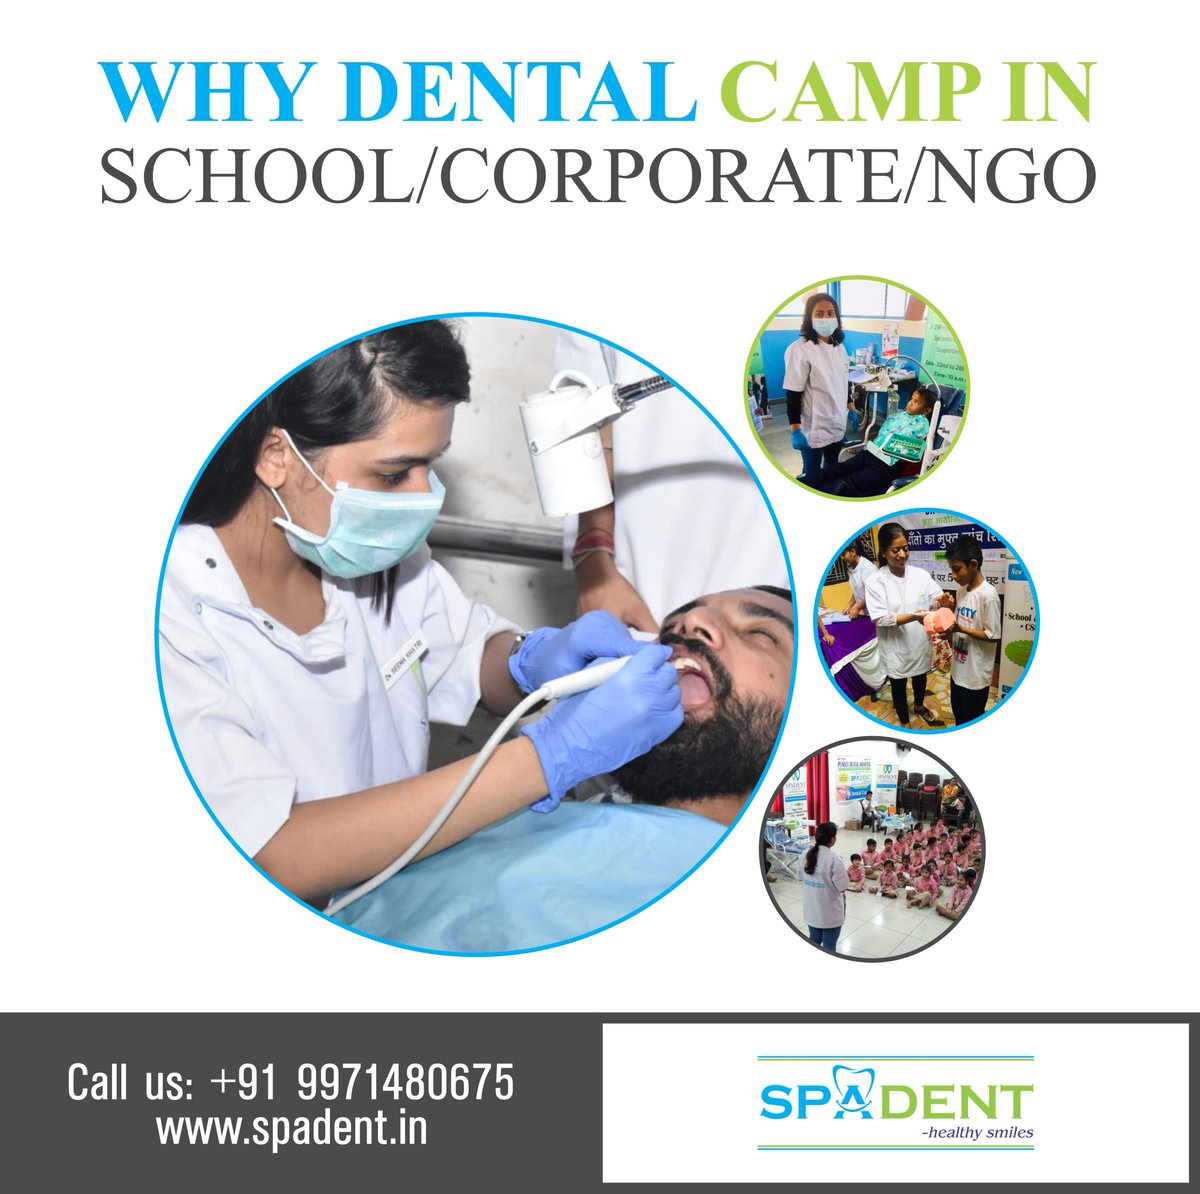 Spadent organize camps in various schools, corporate offices, where we provide on spot treatment which includes #dentalcleaning #cavityfilling #extraction and also #dentalawareness talk, educating students about common dental ailments —